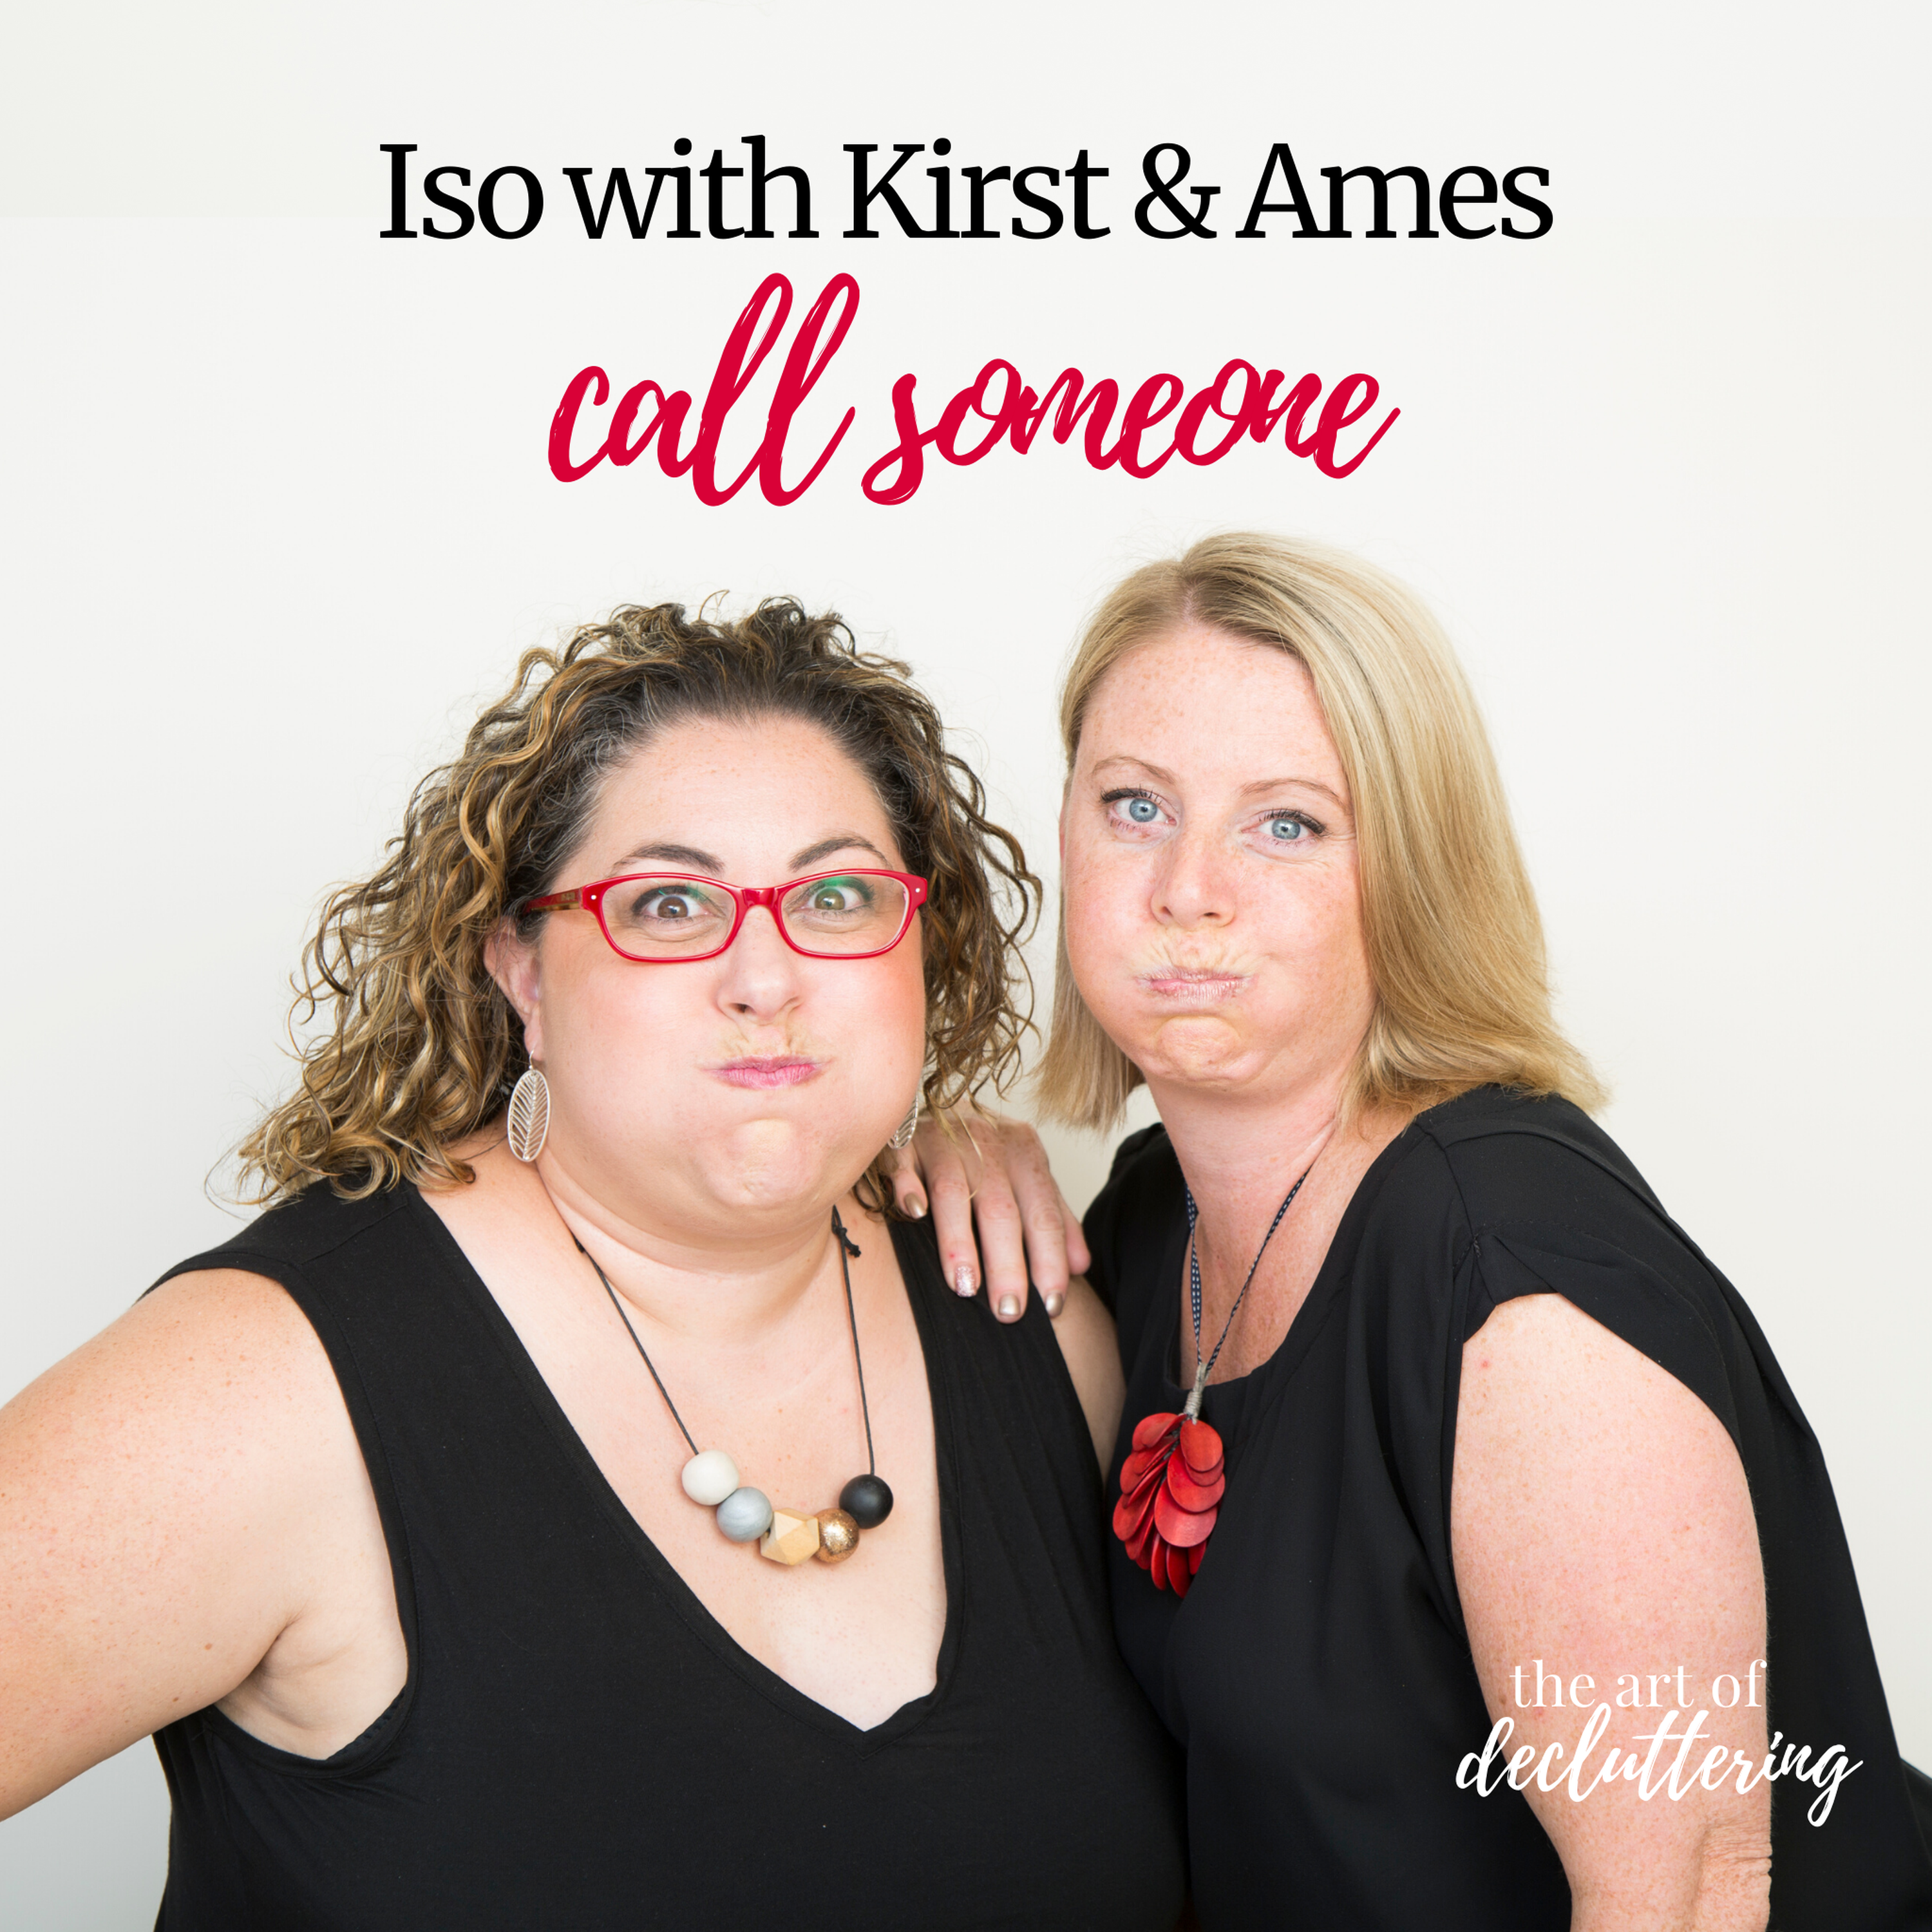 Iso with Kirst & Ames - Call someone